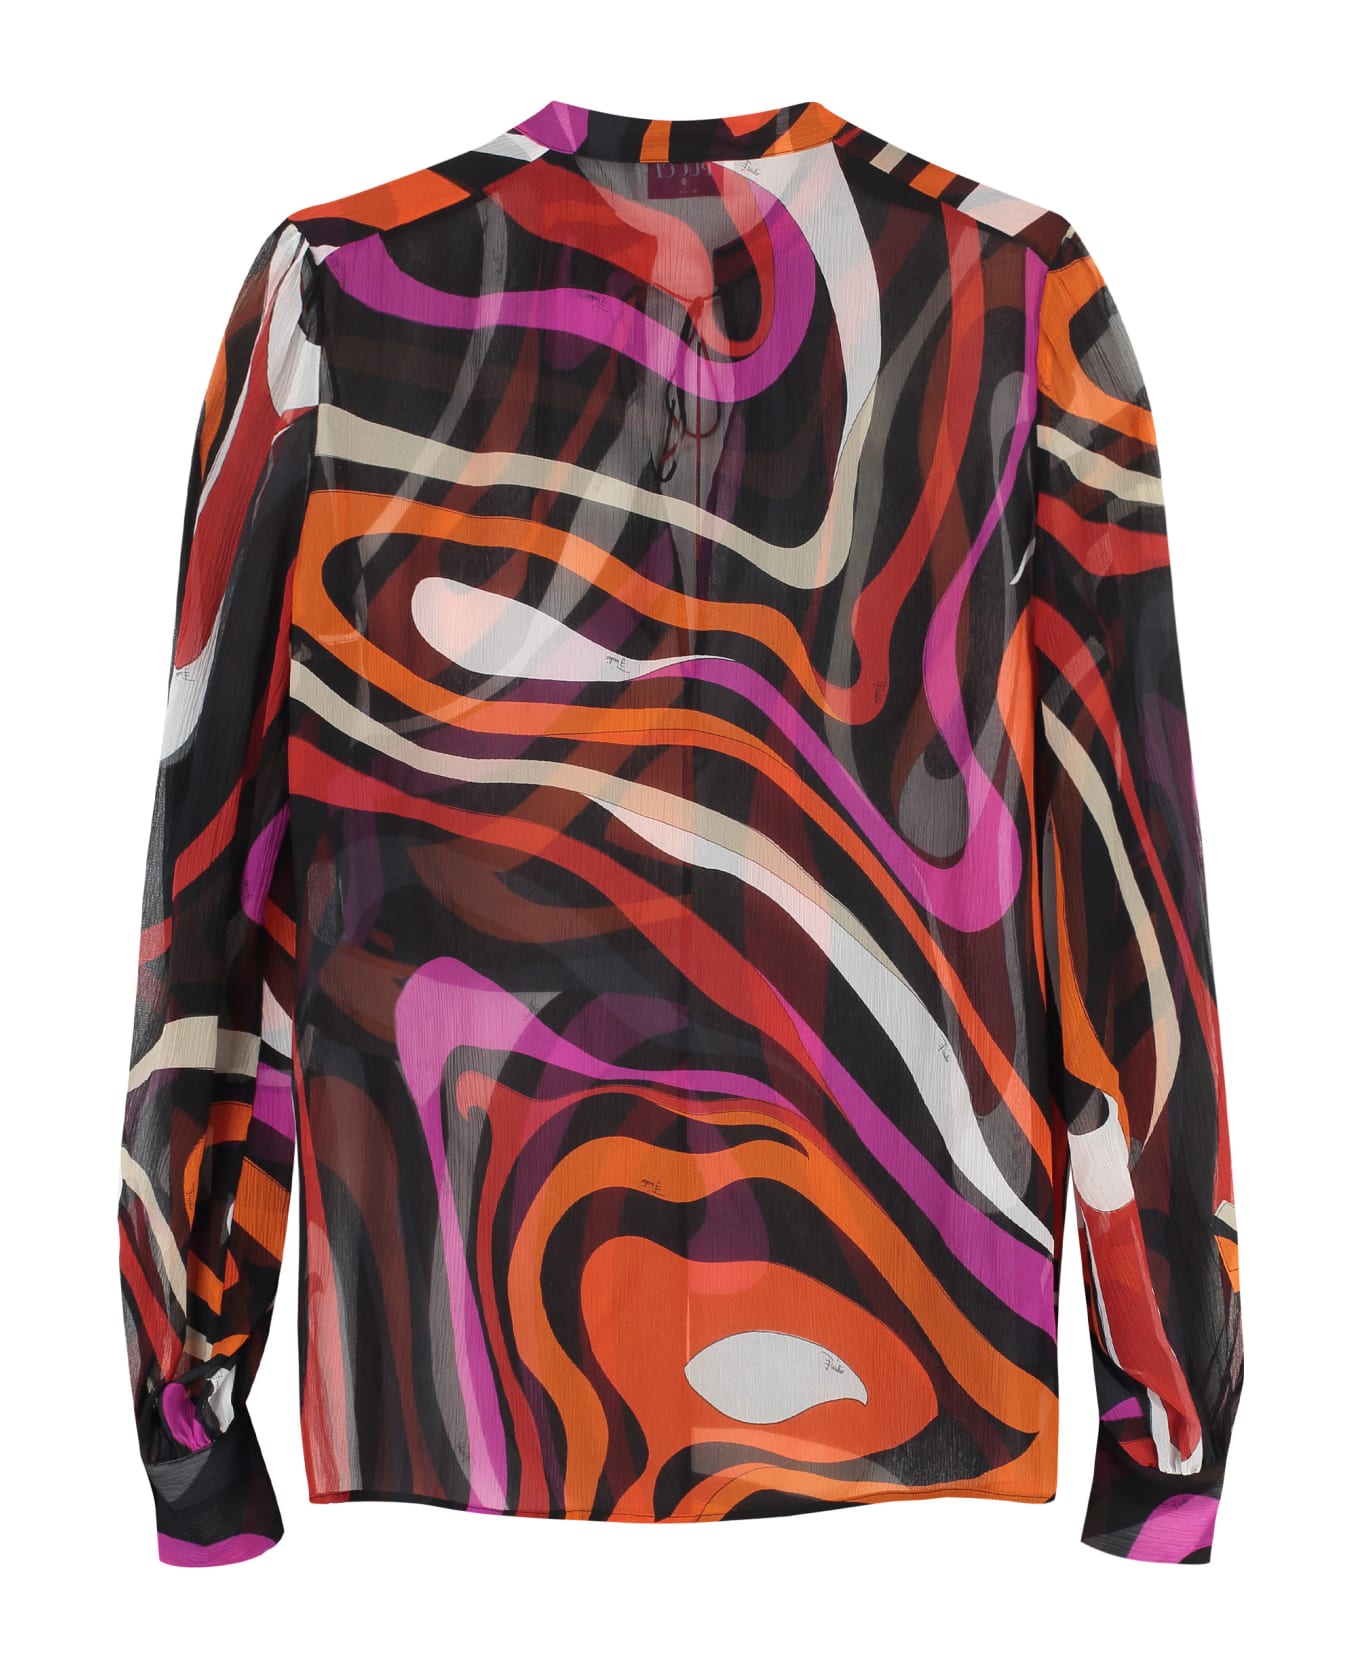 Pucci Printed Silk Blouse - Multicolor ブラウス